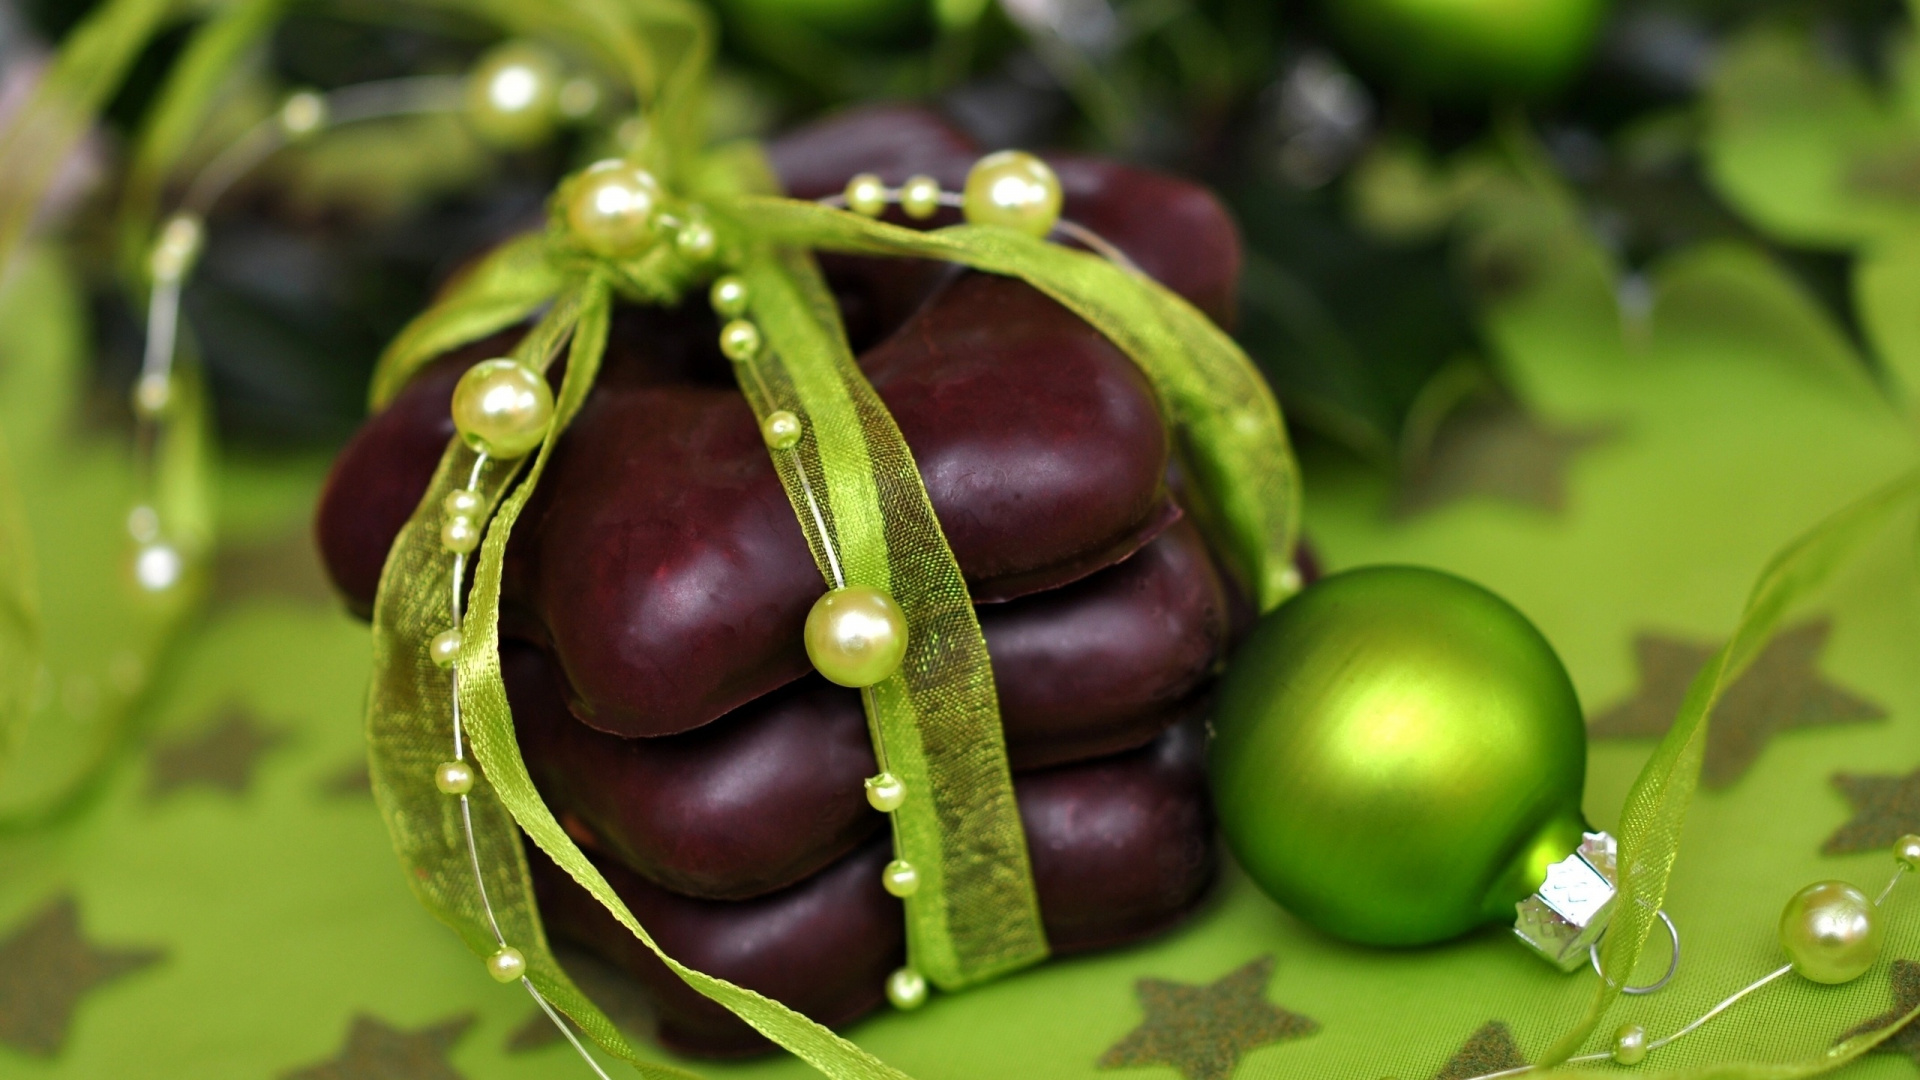 New Year, Christmas Day, Holiday, Fruit, Produce. Wallpaper in 1920x1080 Resolution